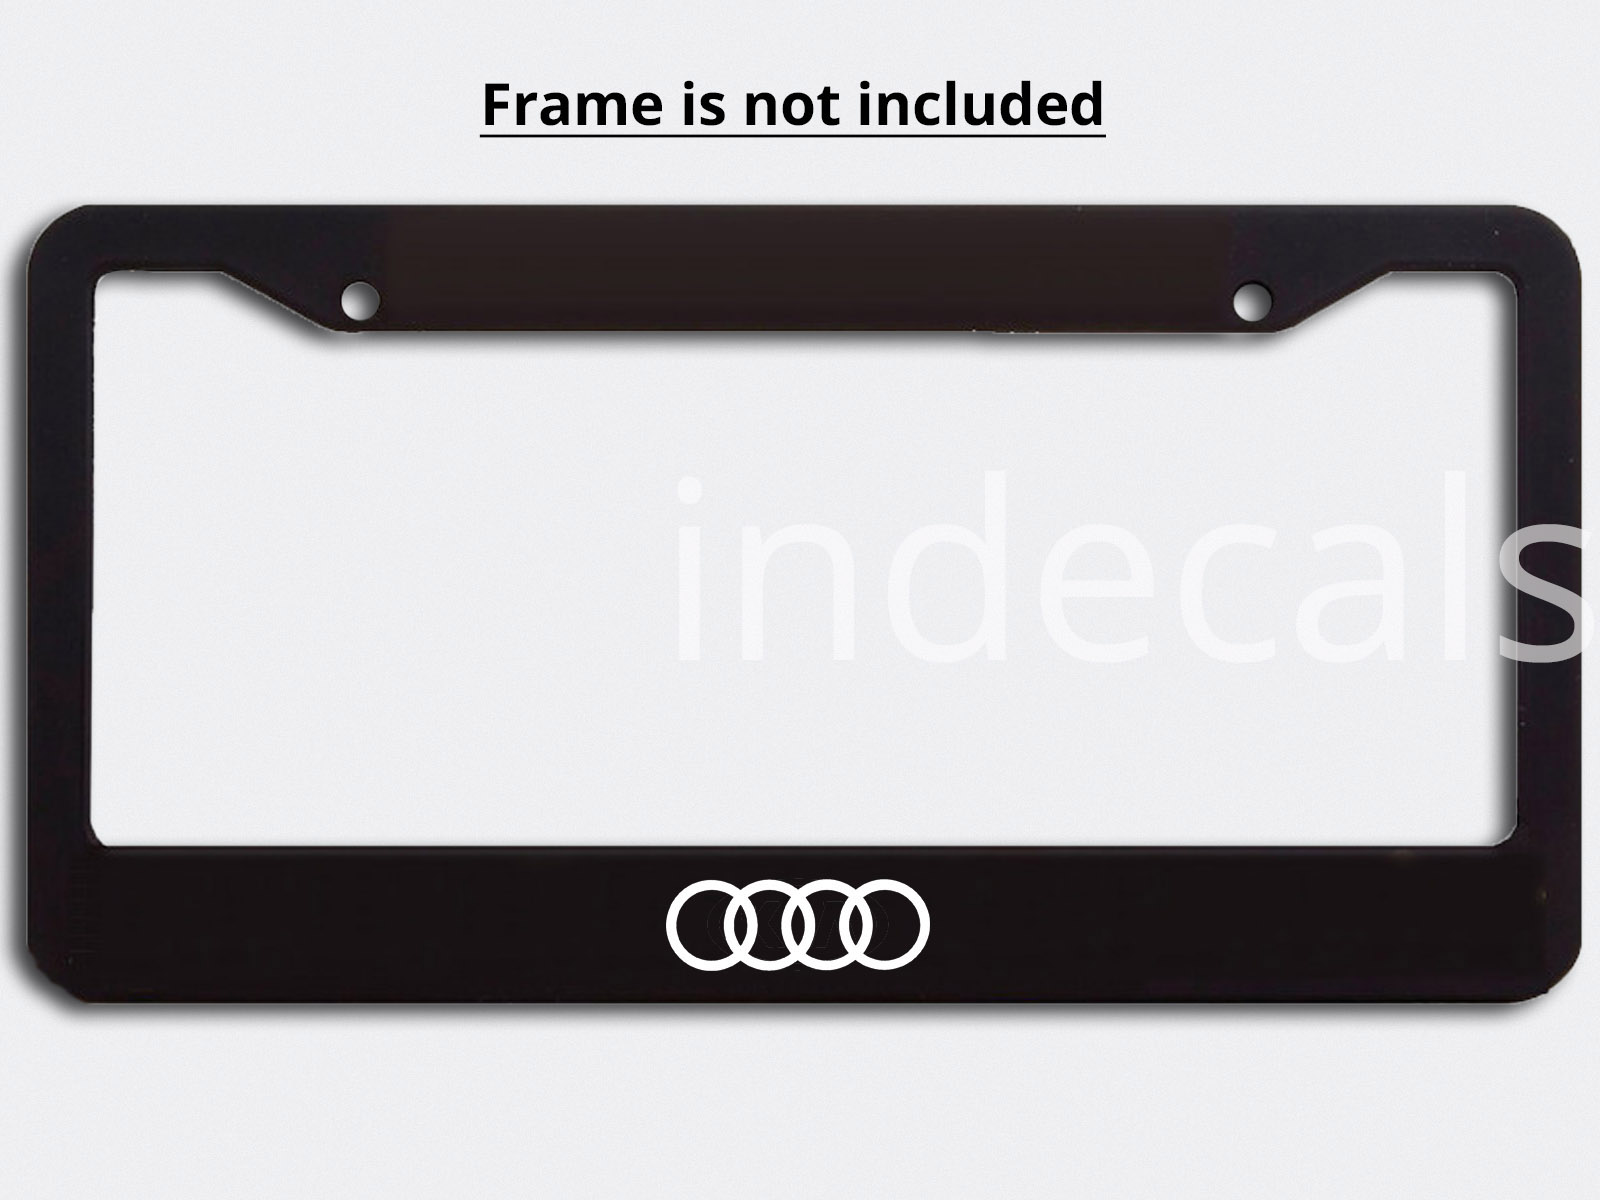 3 x Audi Rings Stickers for License Plate Frame - White